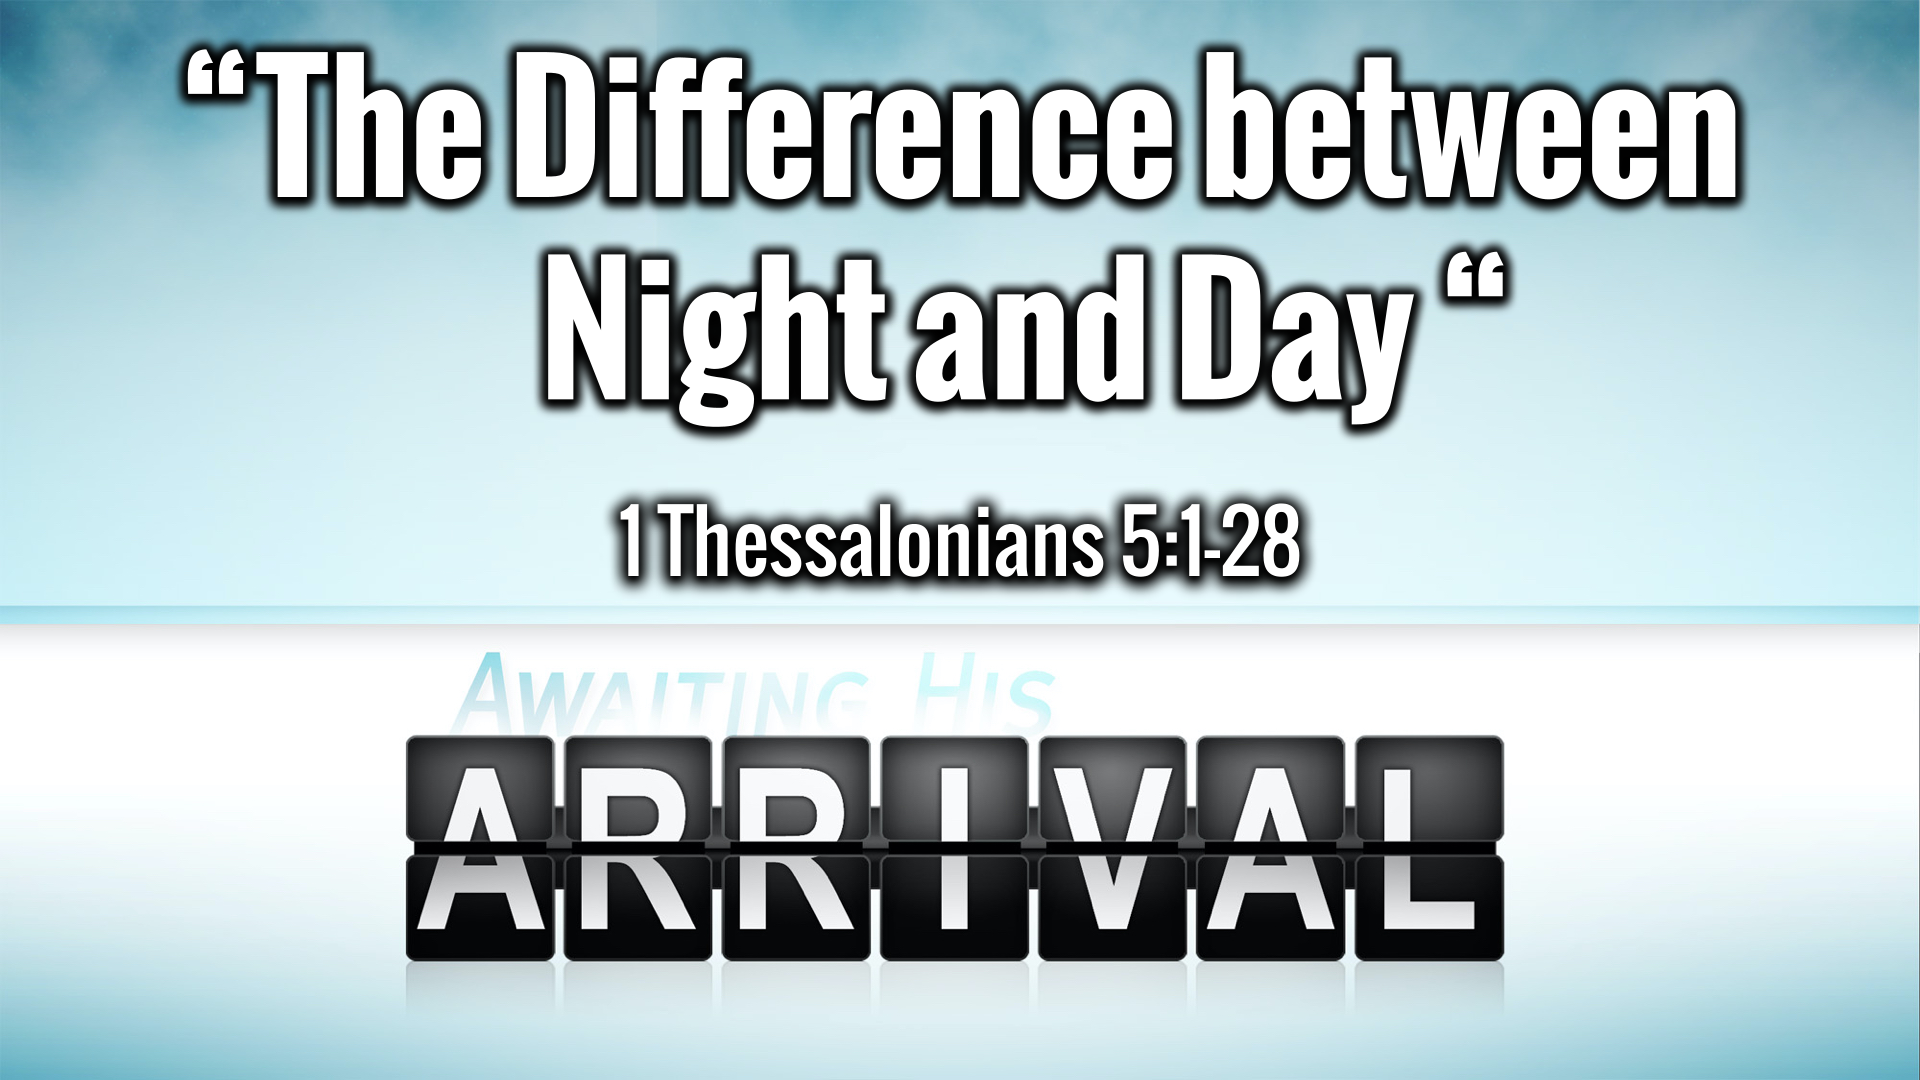 “The Difference between Night and Day”